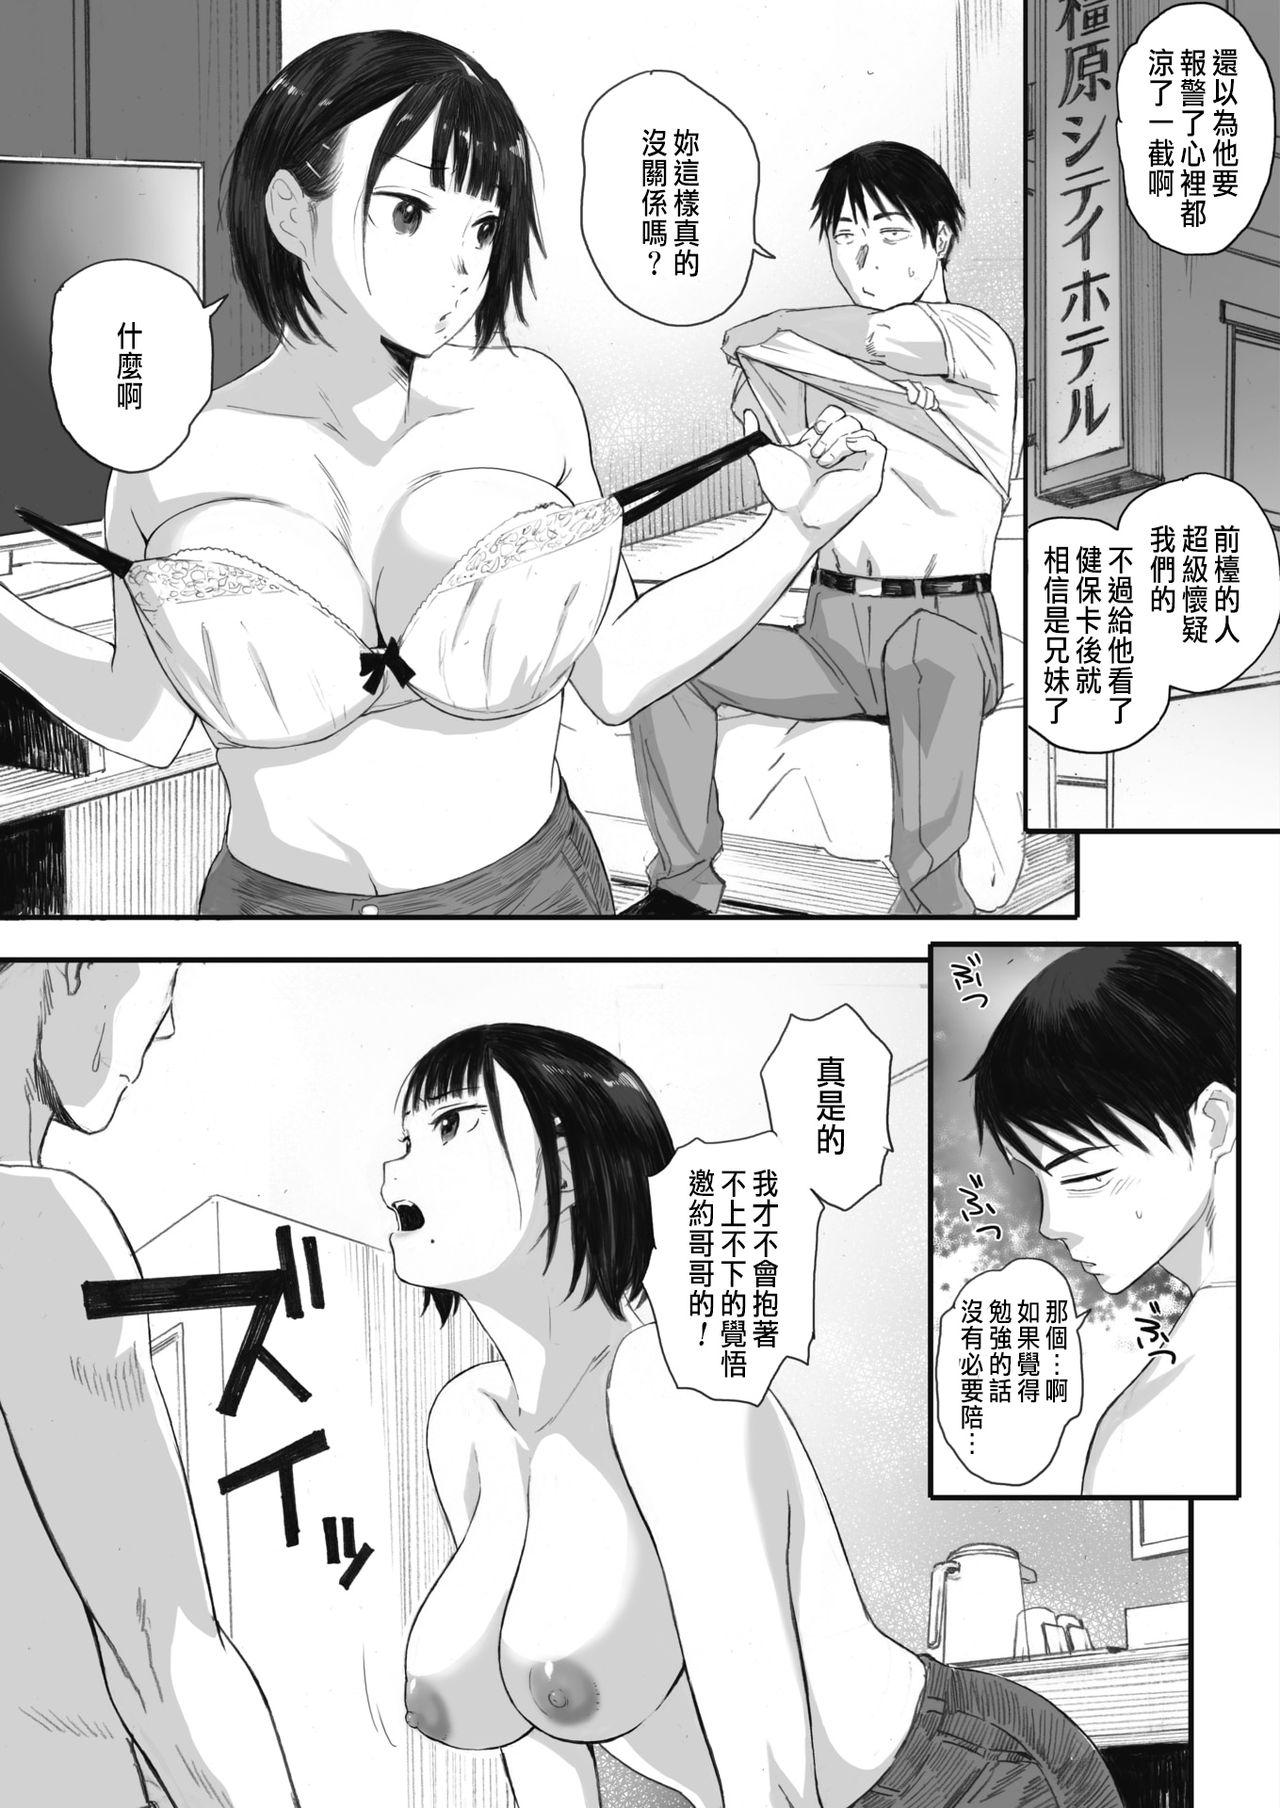 Sex 秋桜が咲いた日に 第2話 Pervs - Page 13